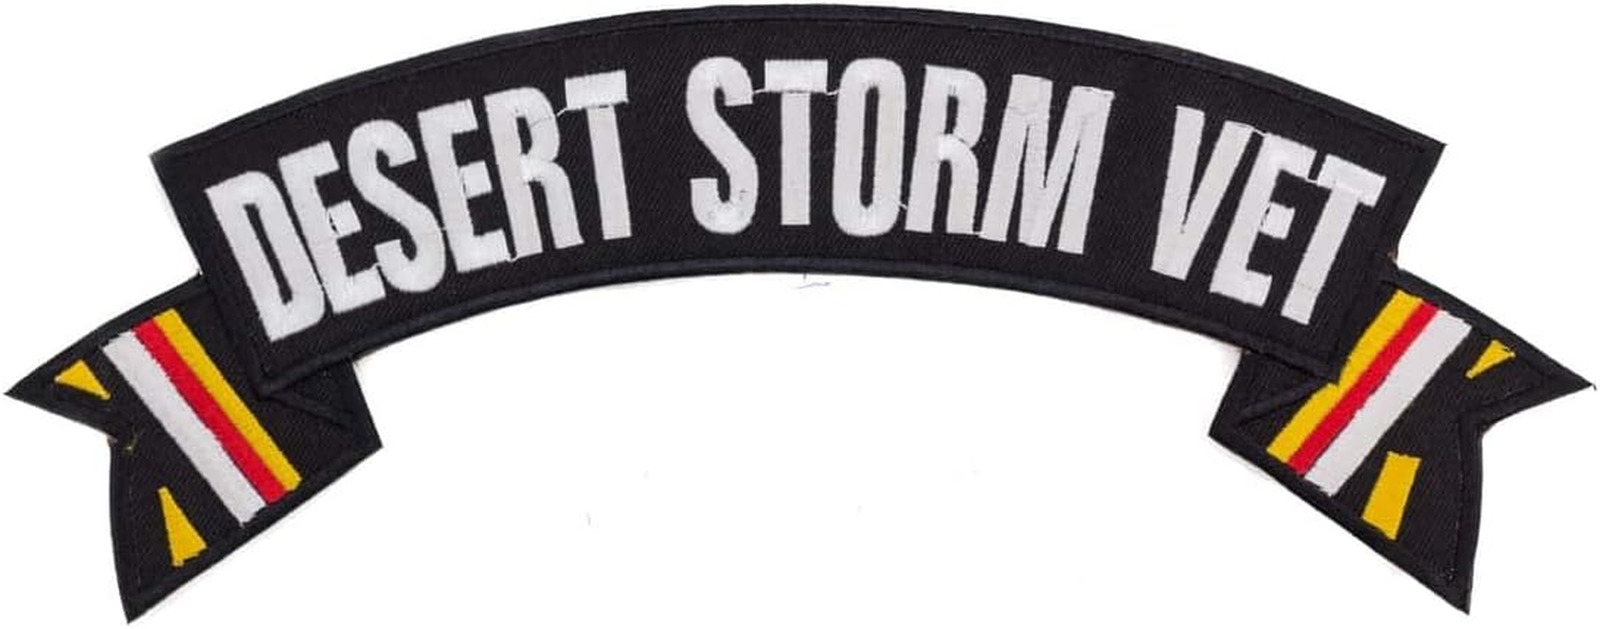 Desert Storm Vet Black W/White with Gold/Red/White Flags Top Rocker Iron on Patc